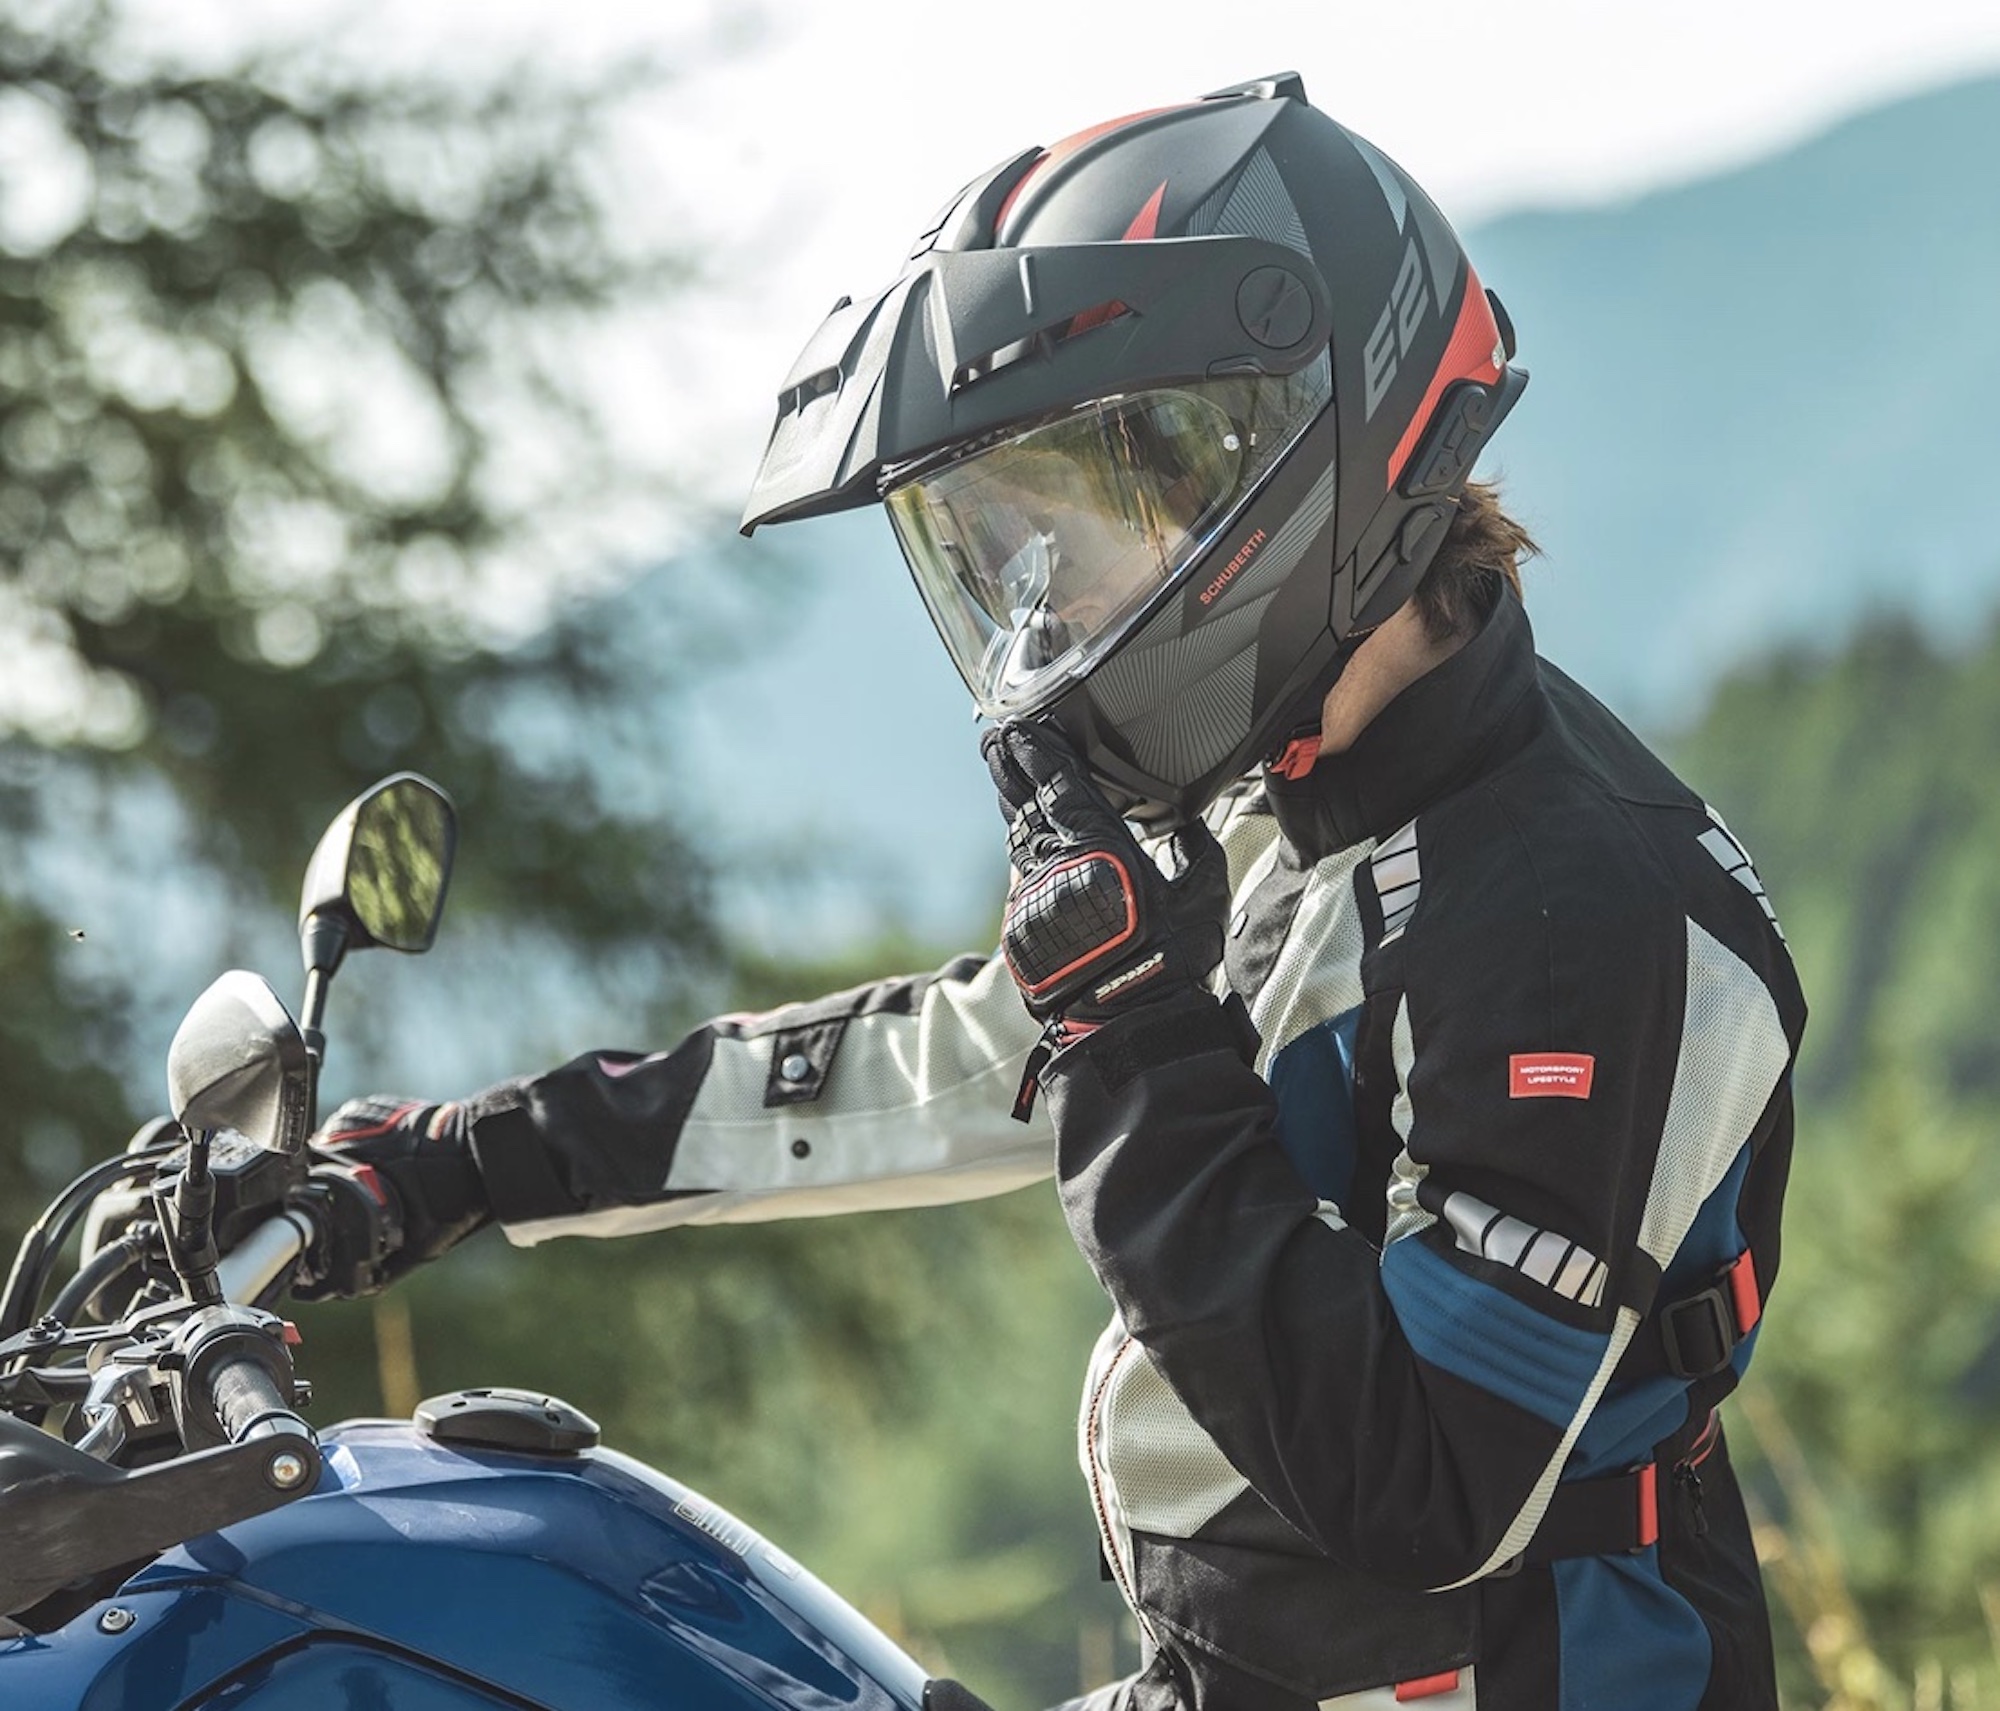 Schuberth's all-new E2 motorcycle helmet. Media sourced from Schuberth's website.